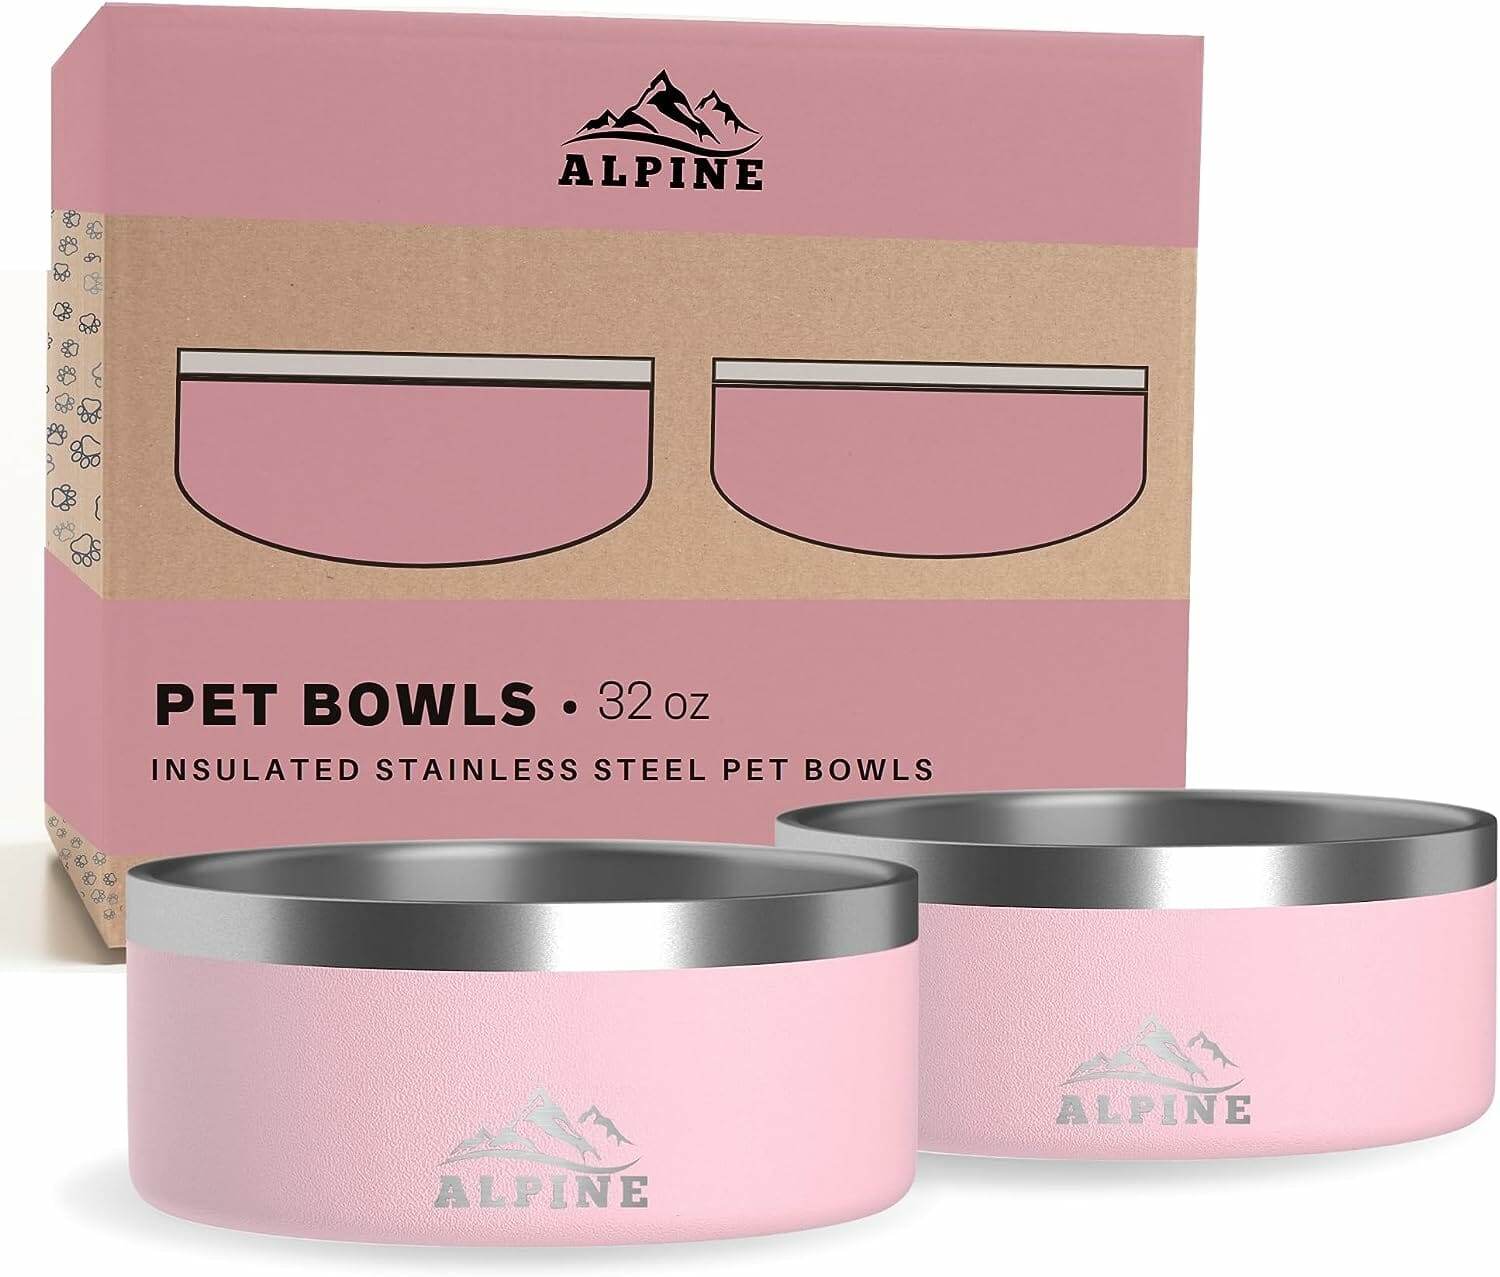 ALPINE Stainless Steel Dog Bowl Review